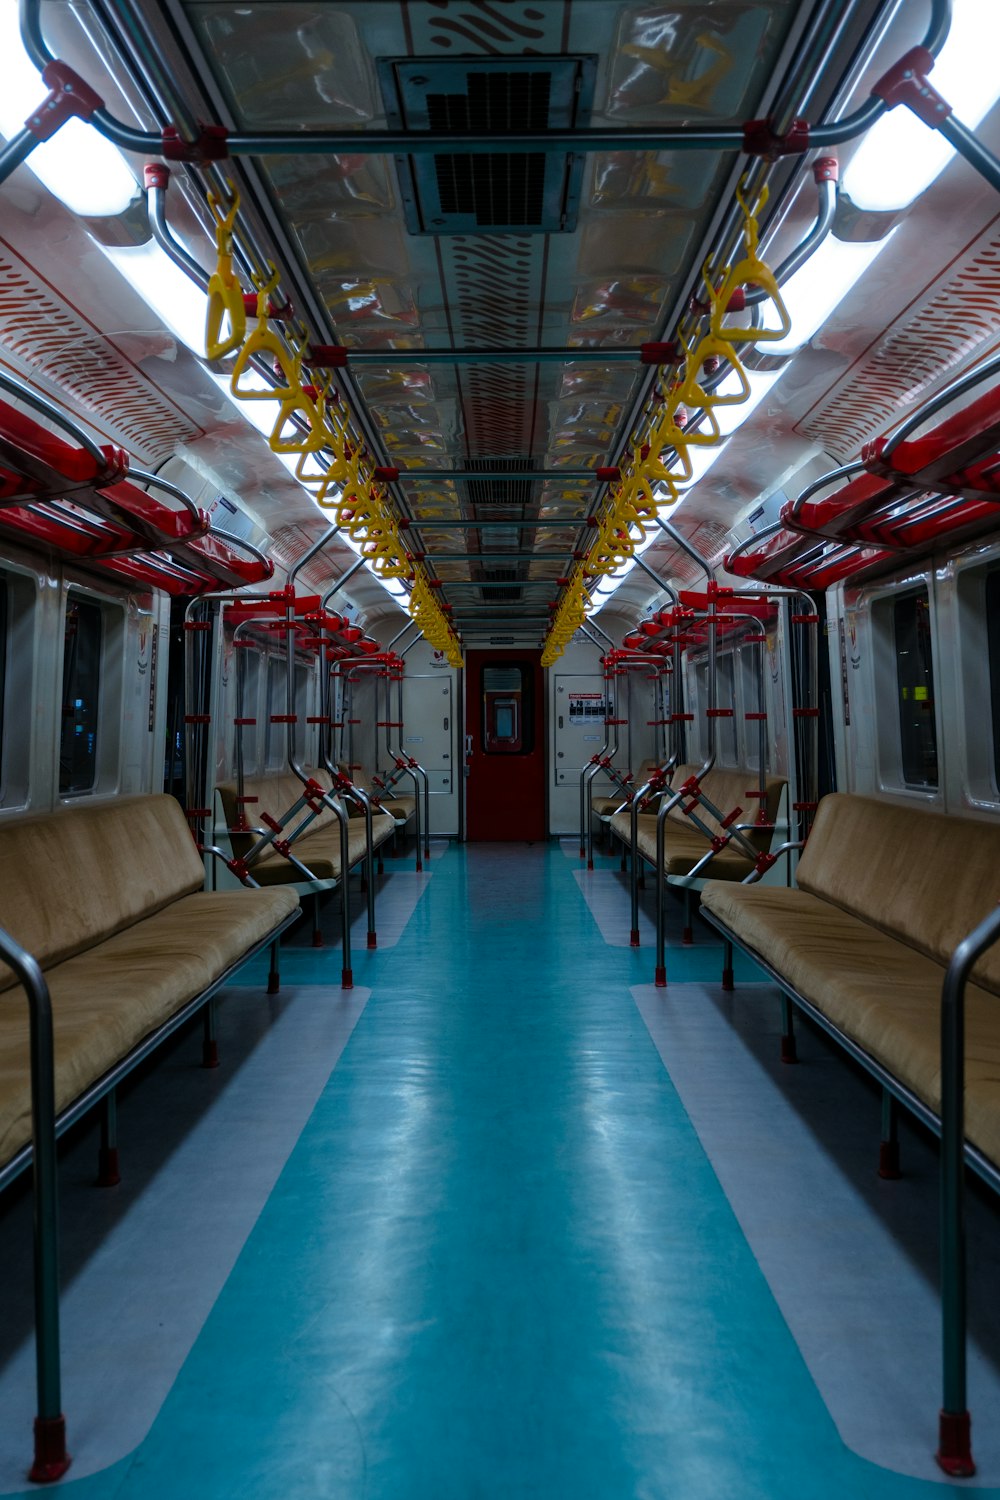 a train car with a long row of seats